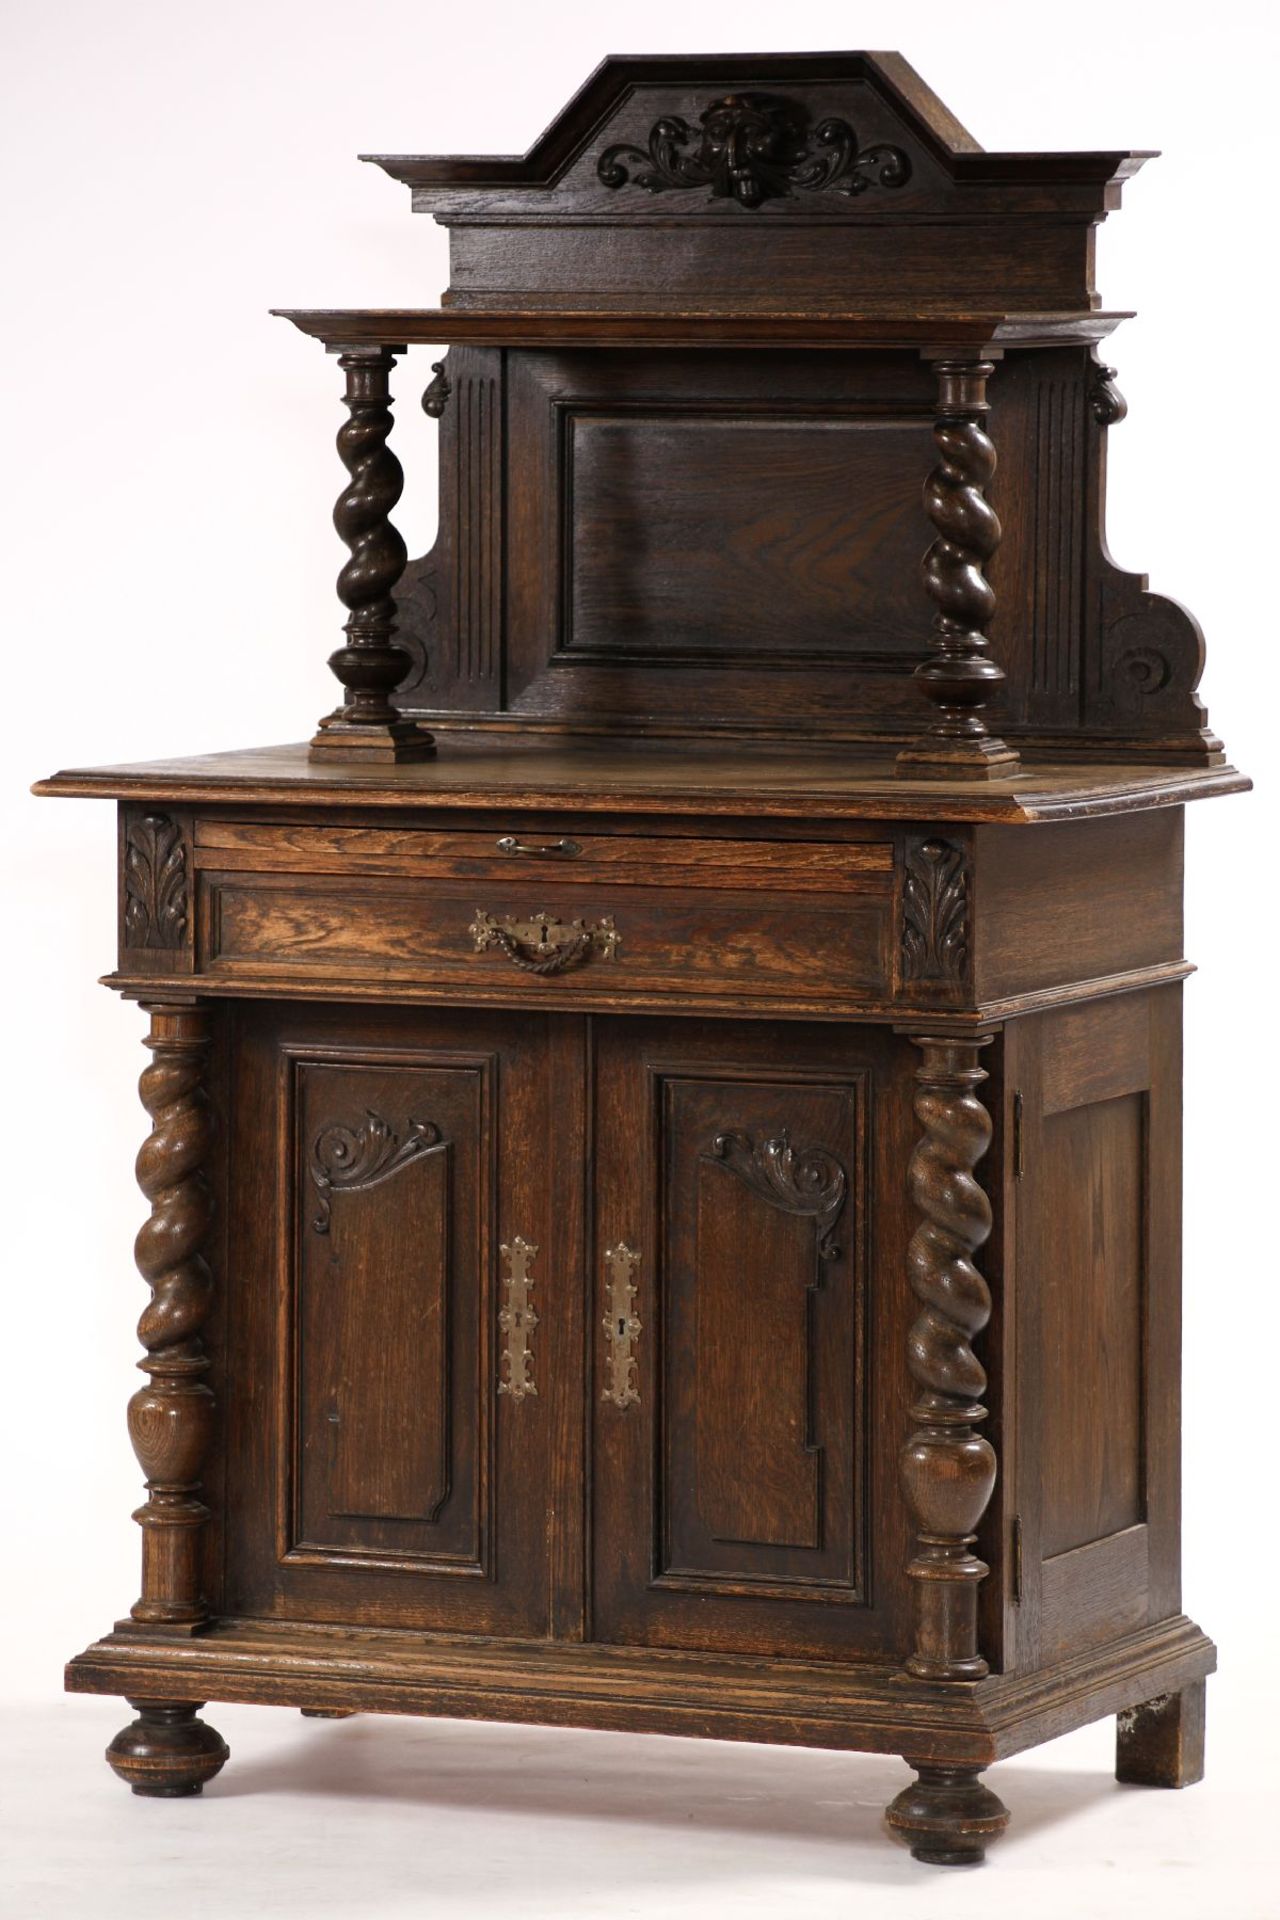 Kredenz, German, around 1890, so-called Wilhelminian style, solid oak and partly veneered, stained